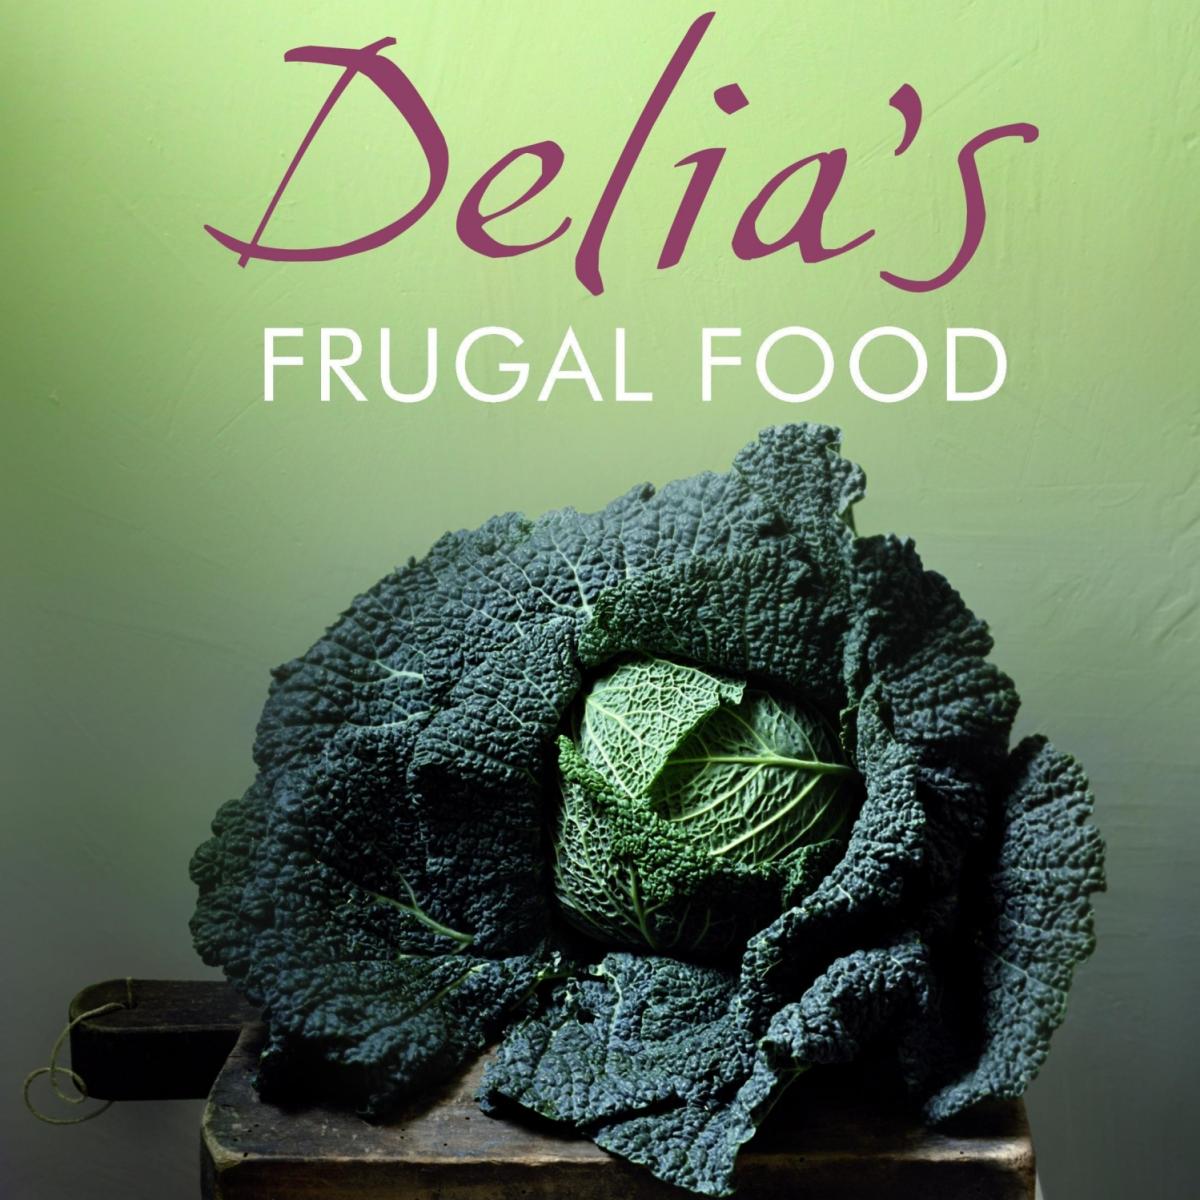 A picture of Delia's Frugal Food